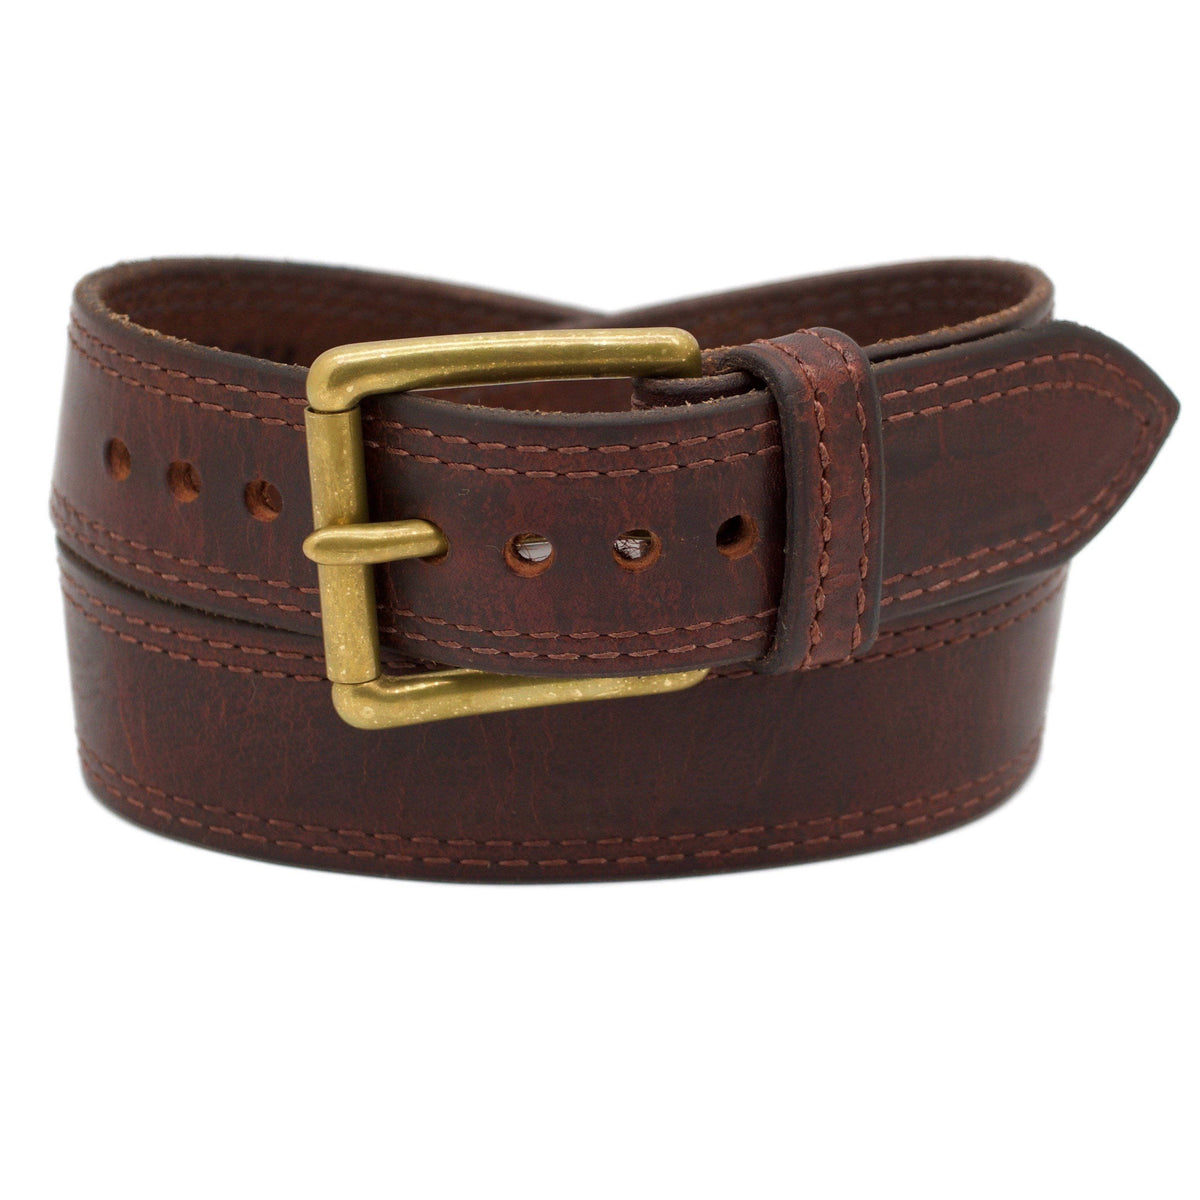 The SEQUOIA WIDE 1.75 Leather Belt